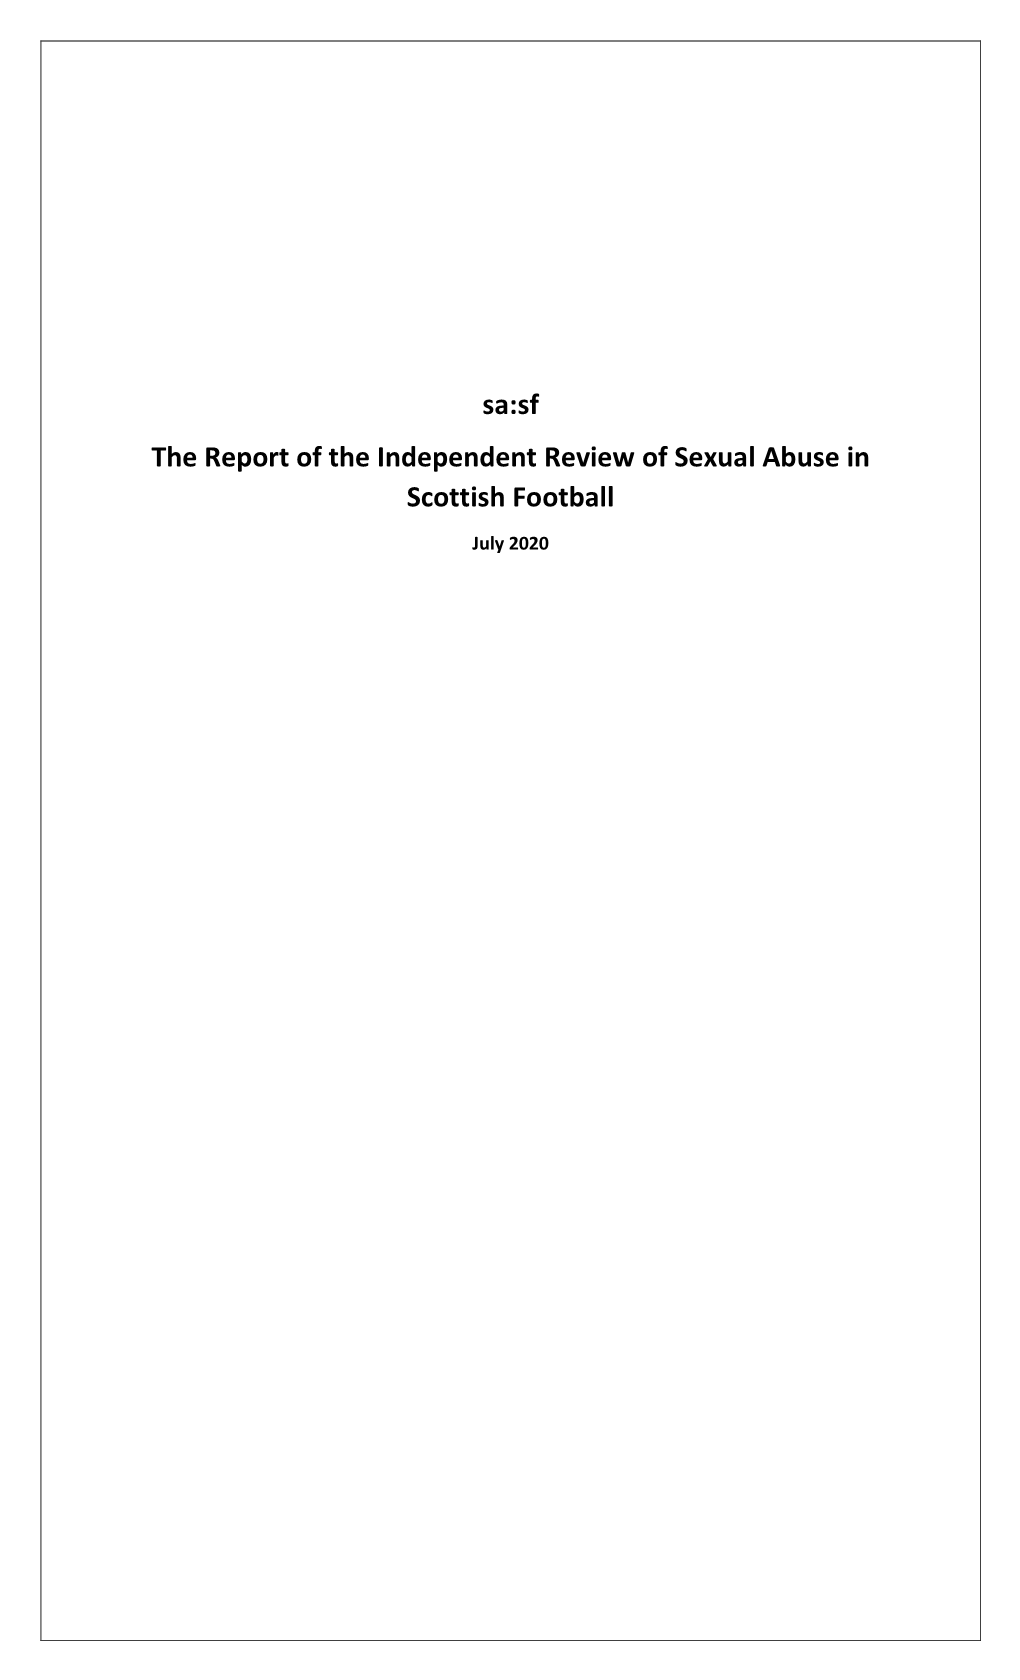 Sa:Sf the Report of the Independent Review of Sexual Abuse in Scottish Football